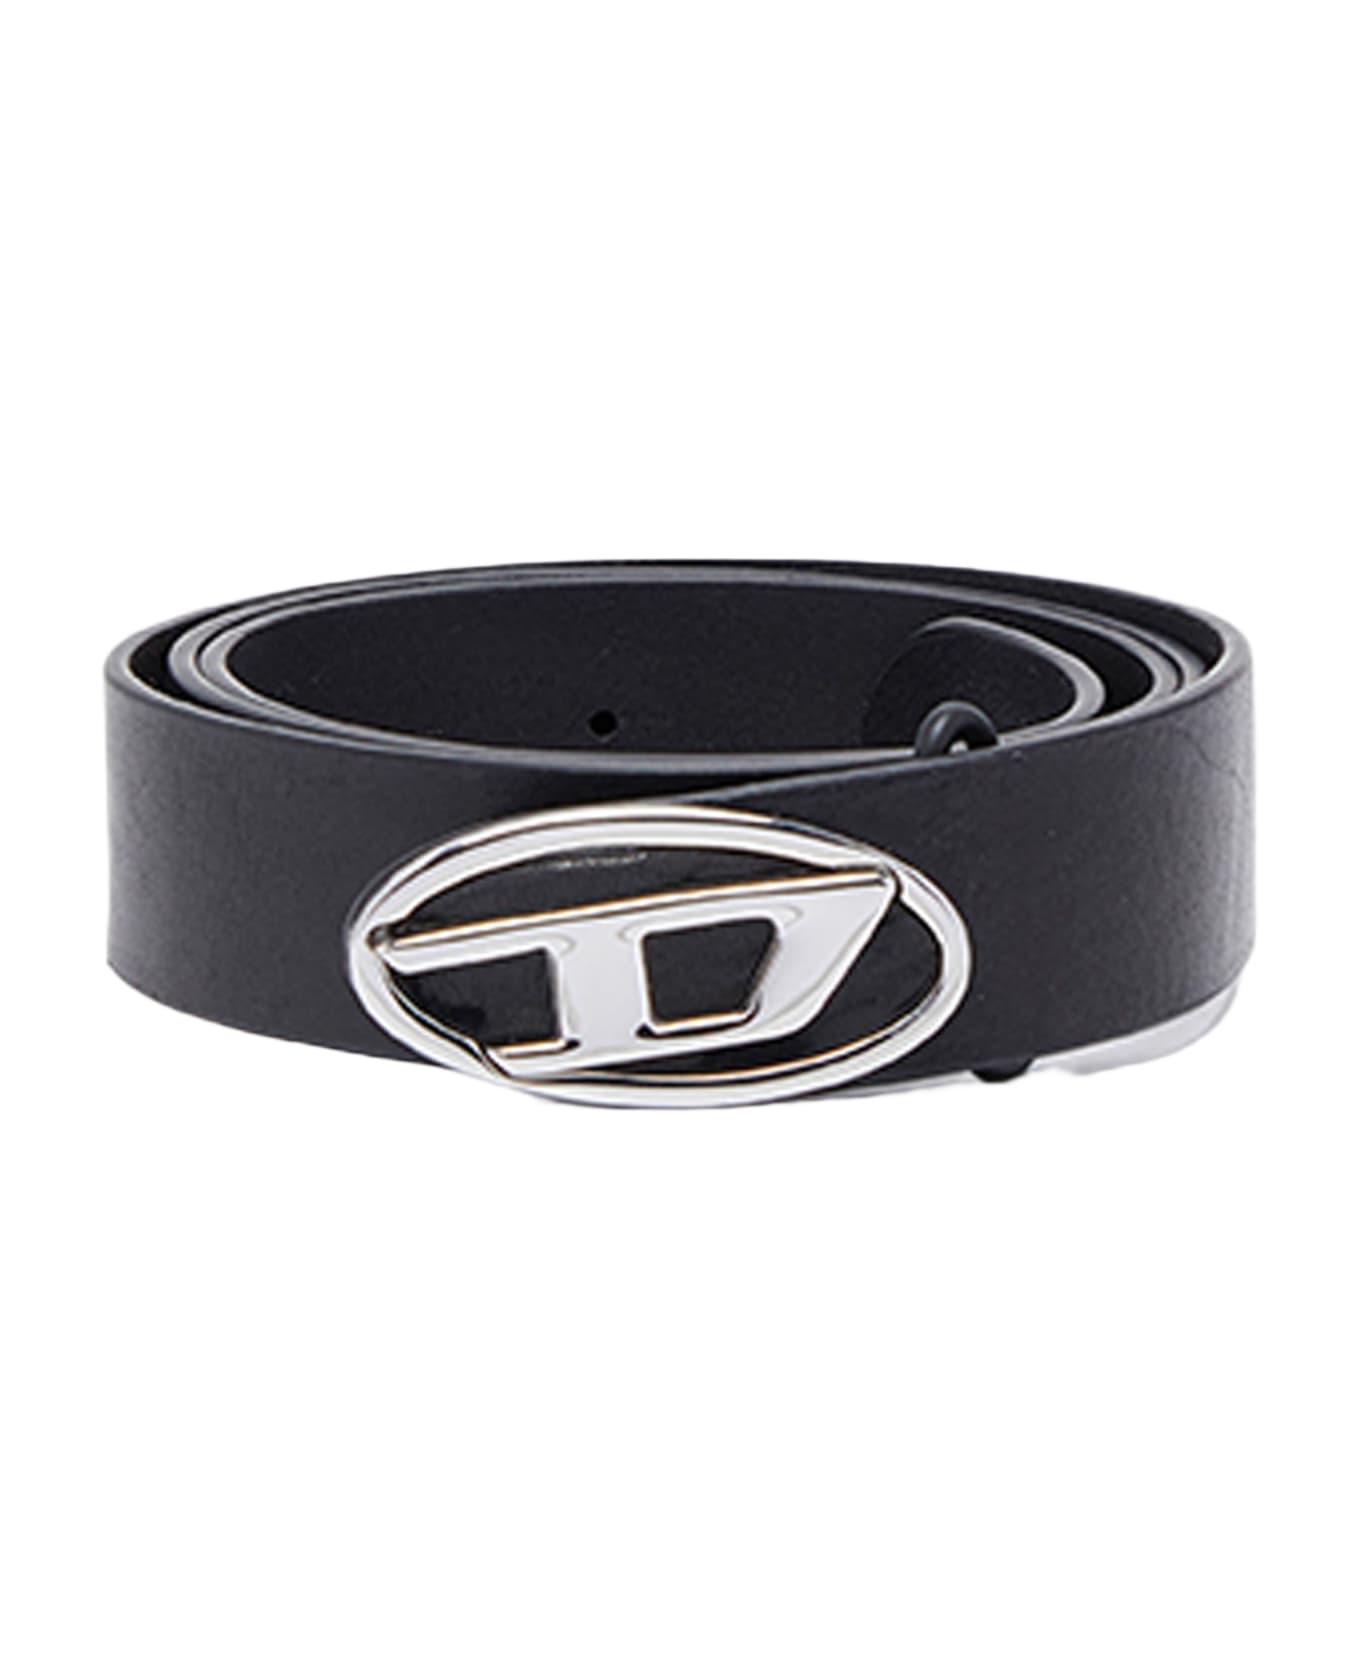 Diesel Oval D Logo B-1dr-layer Mat black and shiny black leather reversible belt - B-1dr Layer - Nero